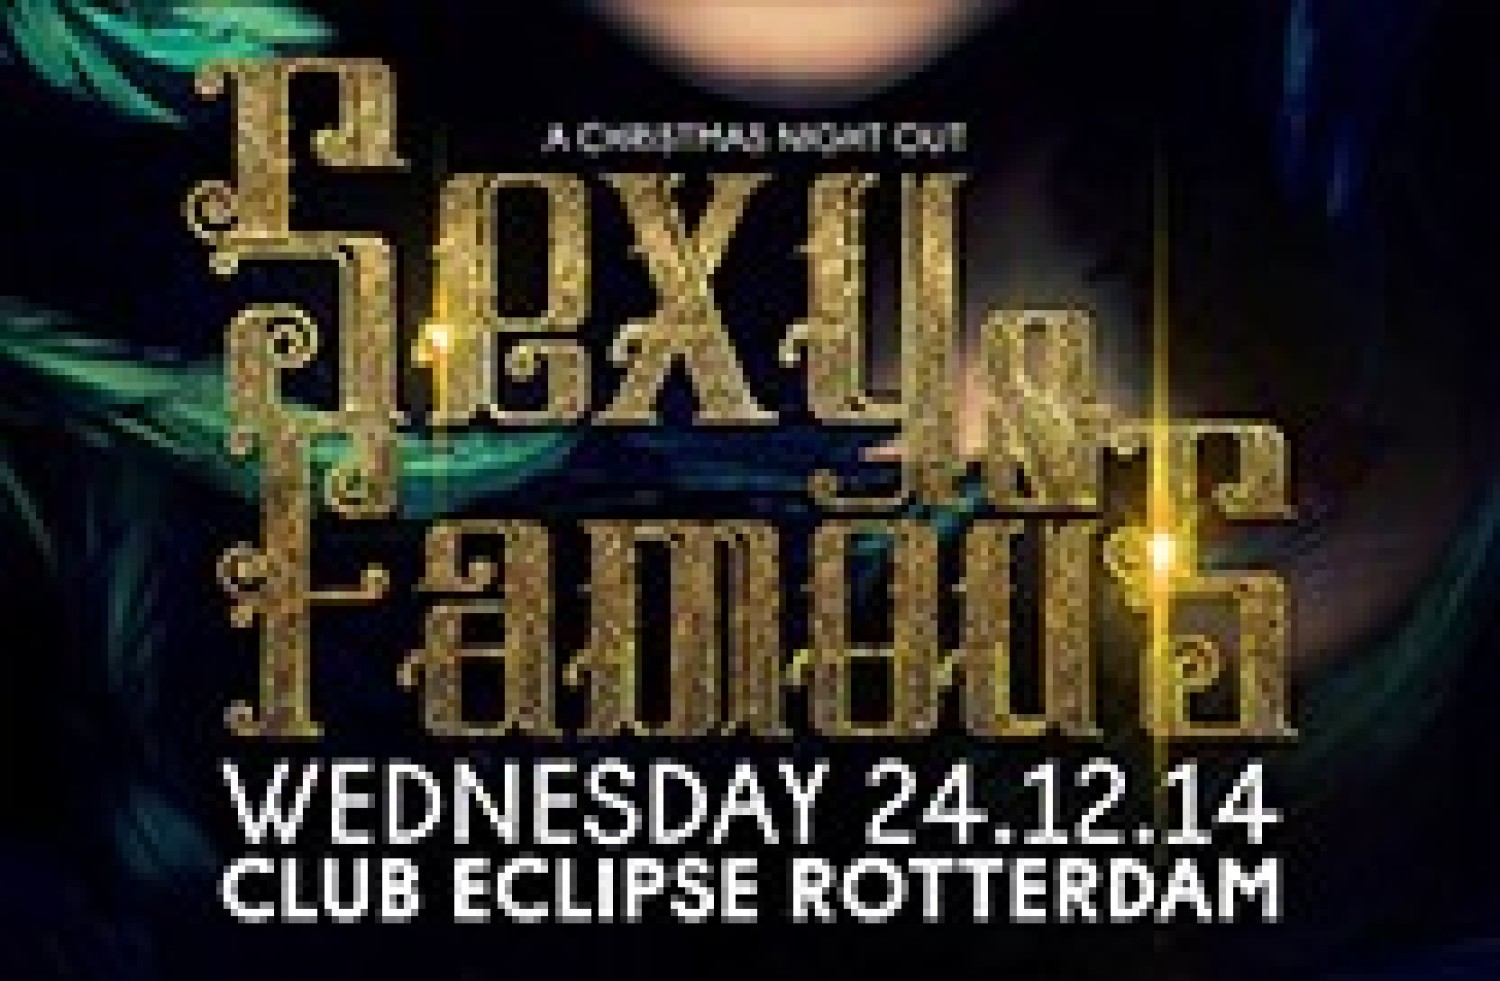 Party nieuws: Sexy & Famous op Christmas Eve in Eclipse Rotterdam